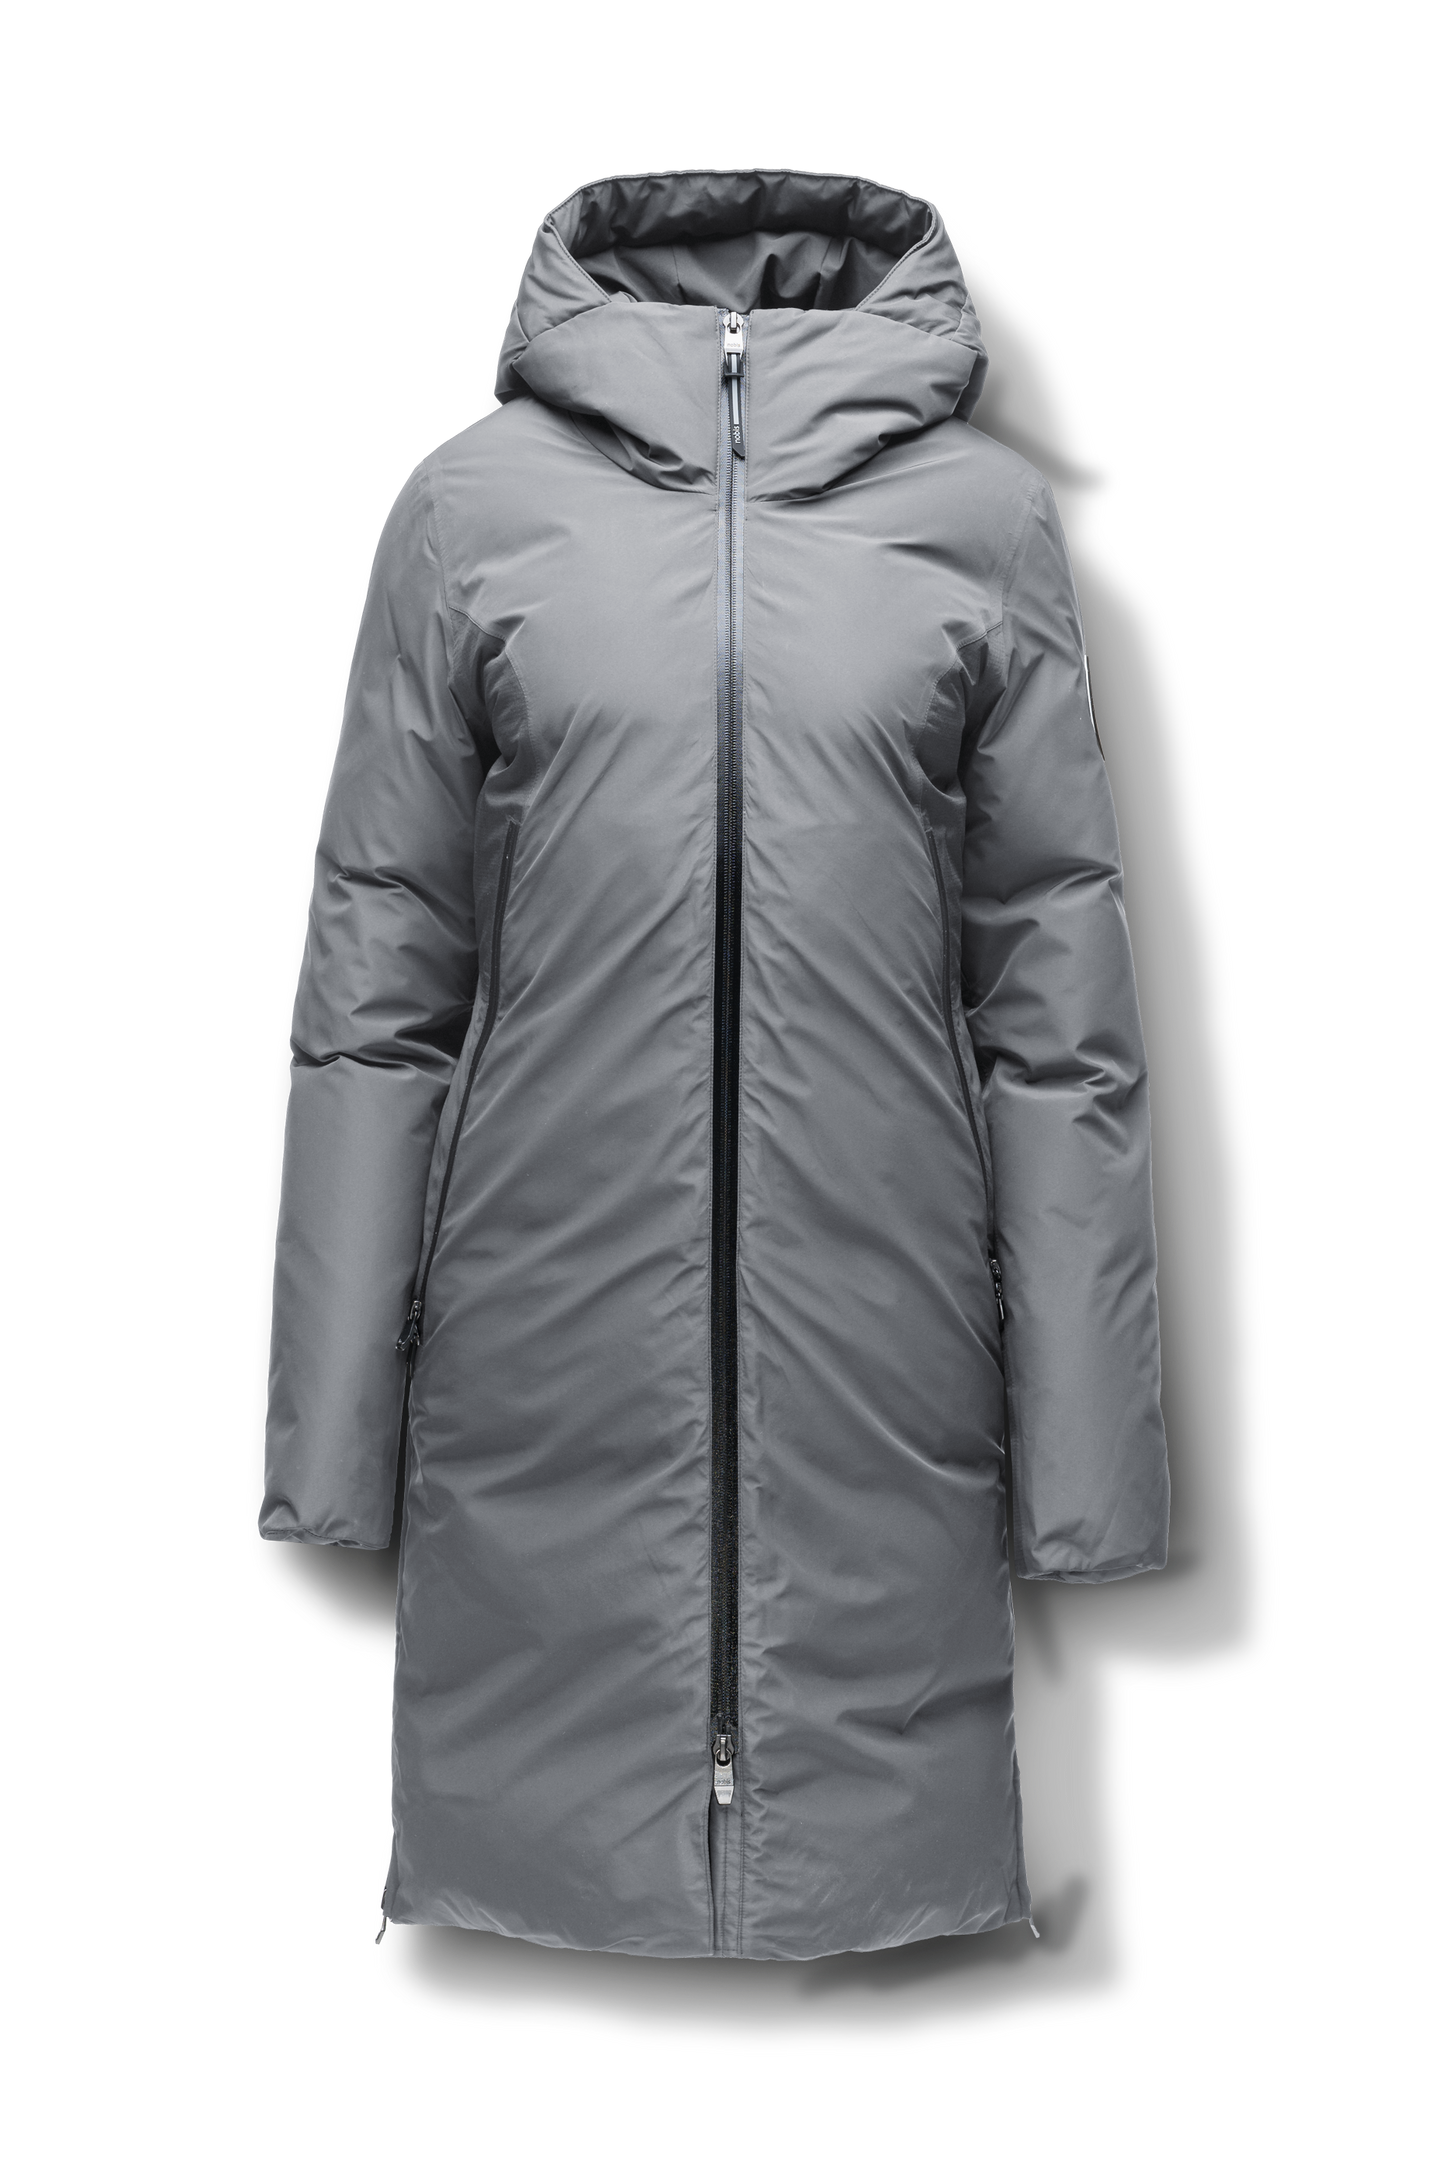 Inara Women's Performance Parka in knee length, premium 3-ply micro denier and stretch ripstop fabrication with DWR coating, Premium Canadian White Duck Down insulation, non-removable down-filled hood, centre front two-way zipper, large vertical zipper pockets along waist, zipper vents along bottom side hem, in Concrete